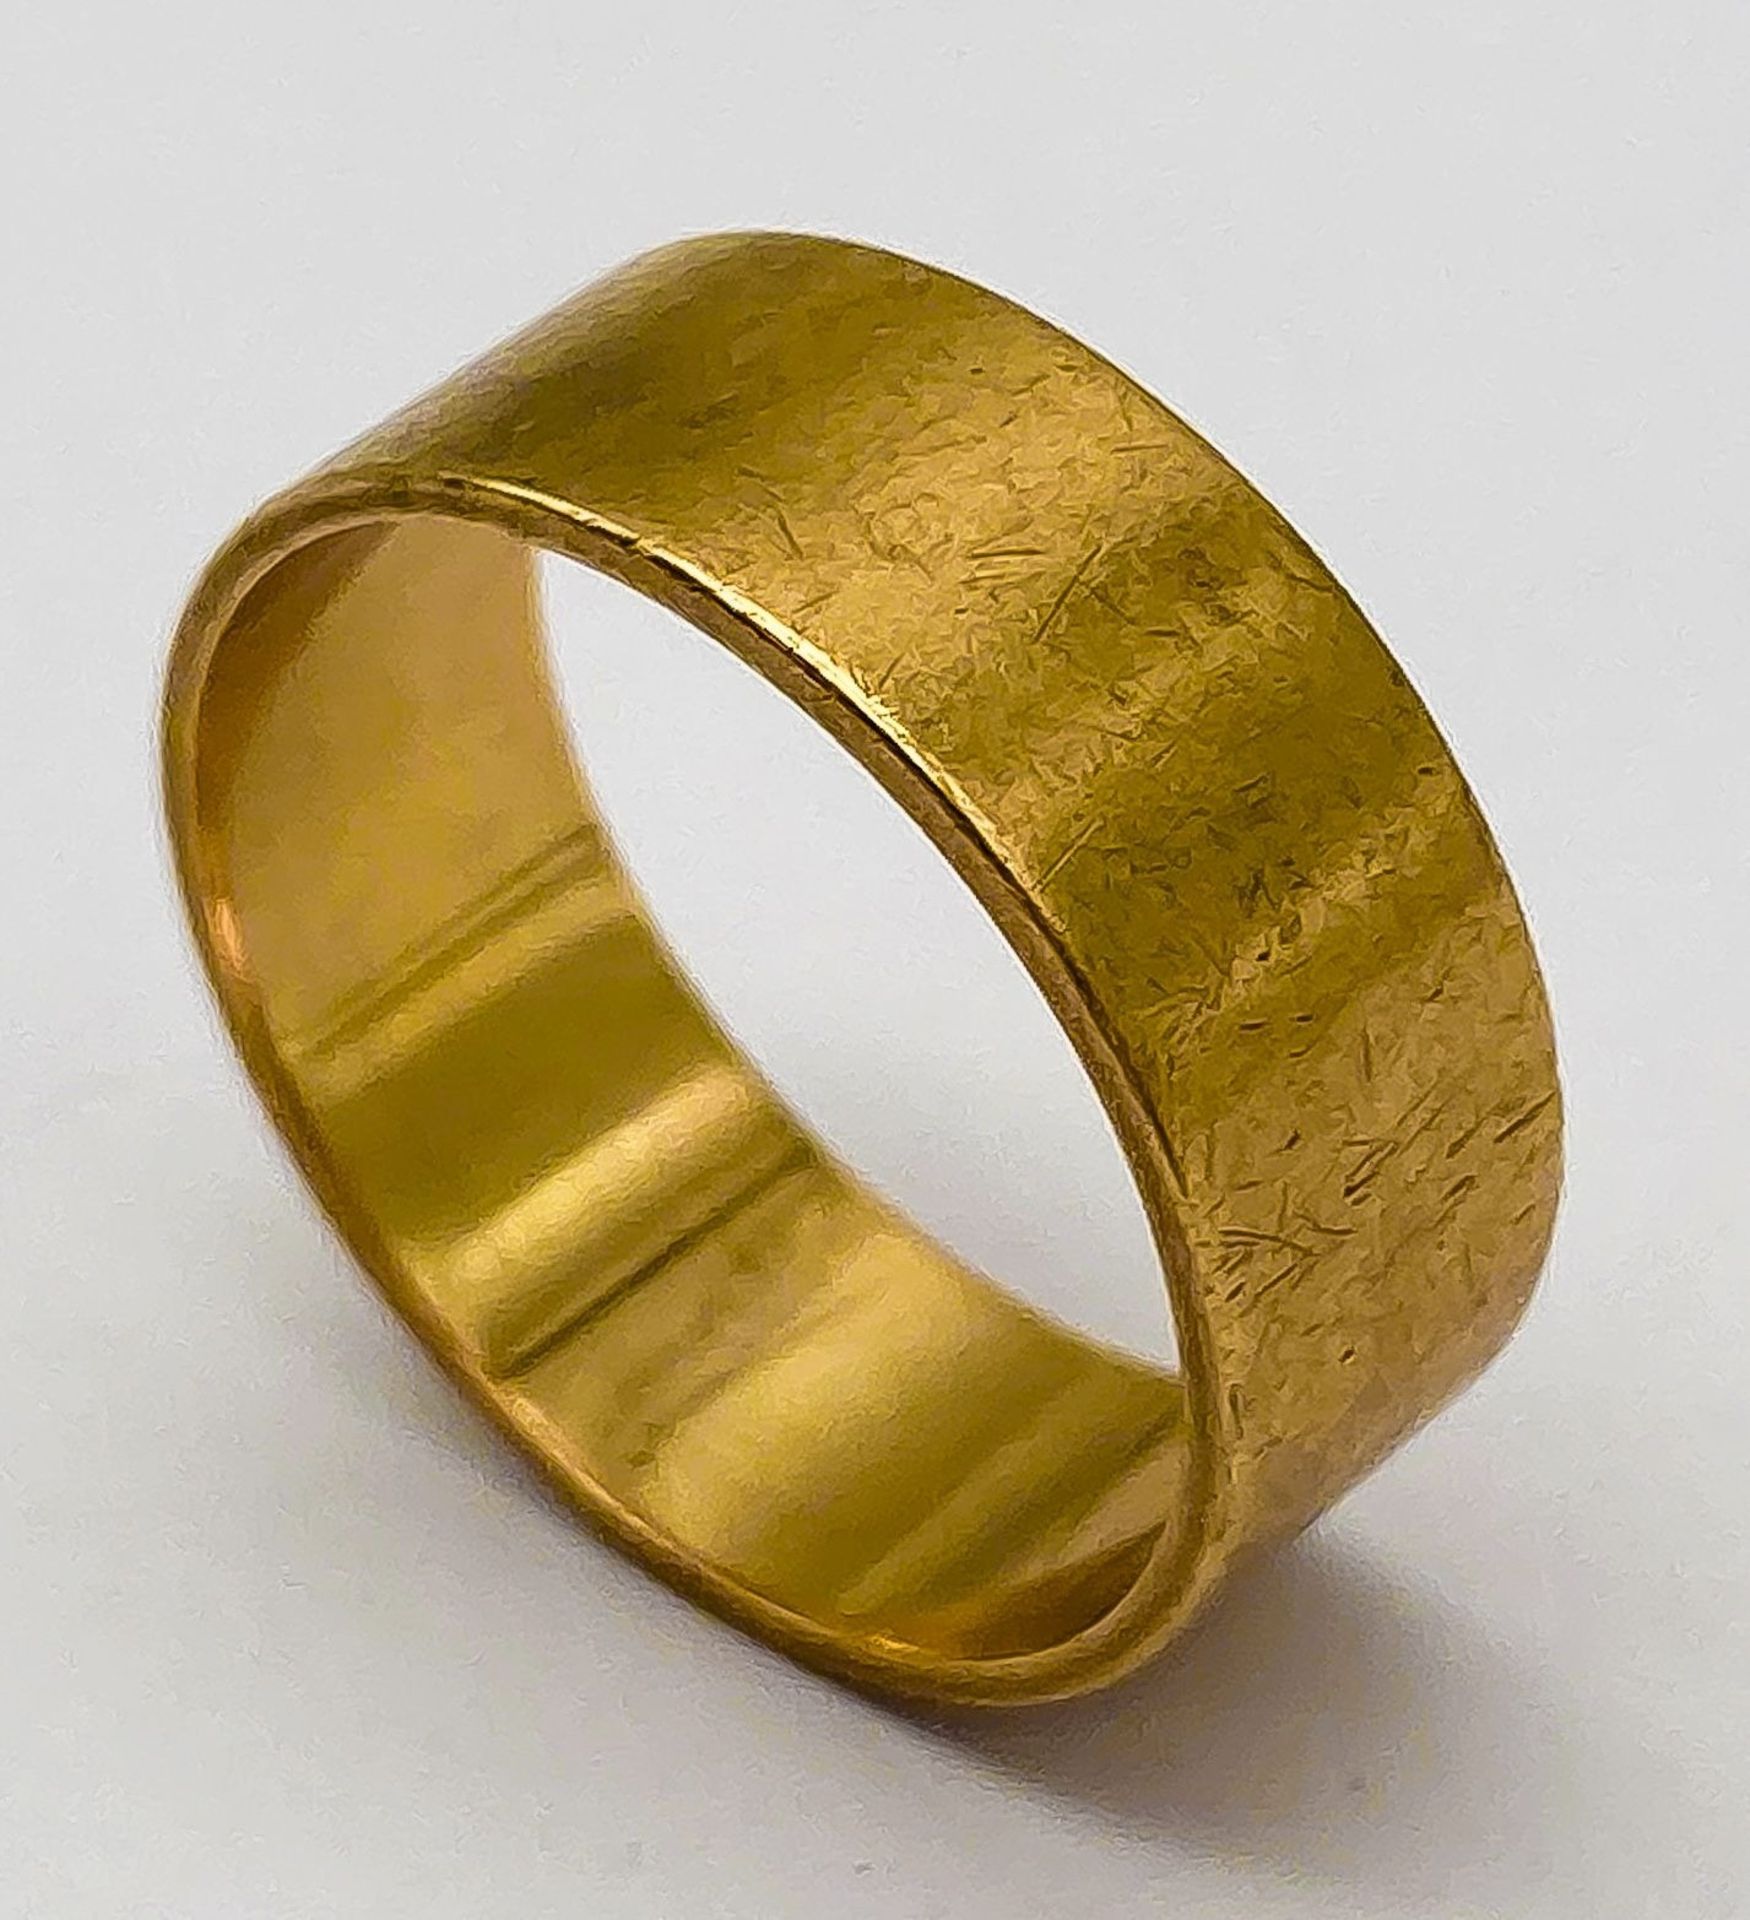 A 9 K yellow gold band ring, size: U, weight: 5.7 g.